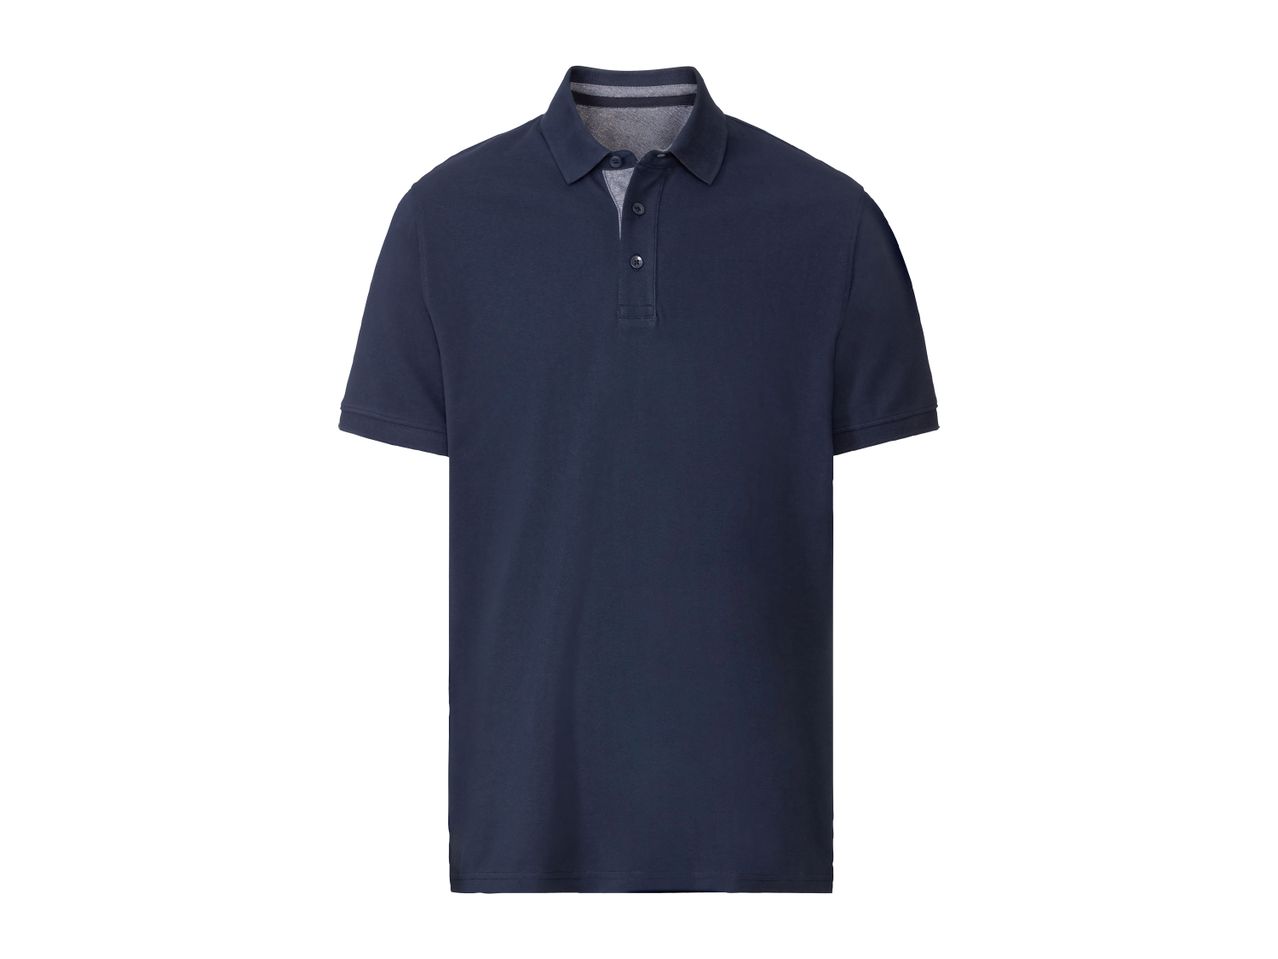 Go to full screen view: Men’s Polo Shirt - Image 1